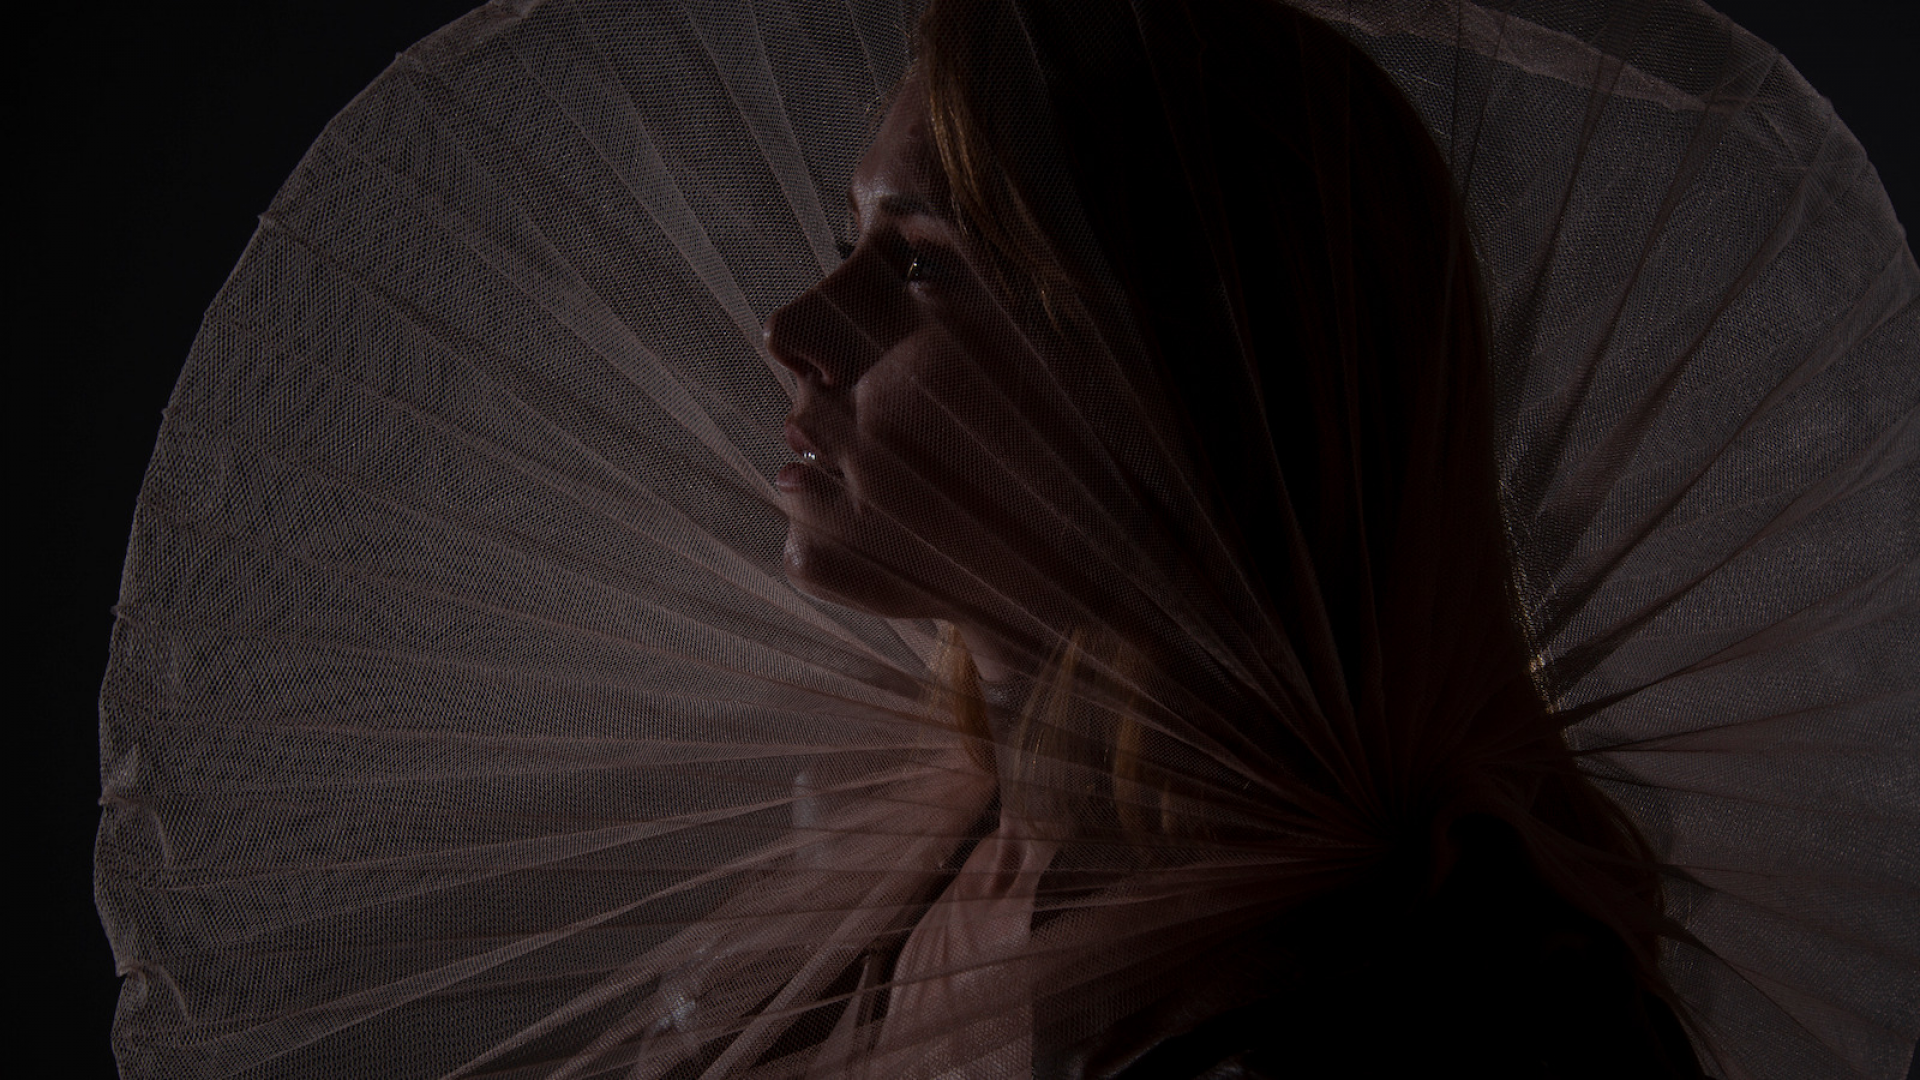 photo close up of a female artists face in profile taken through a transparent net headpiece